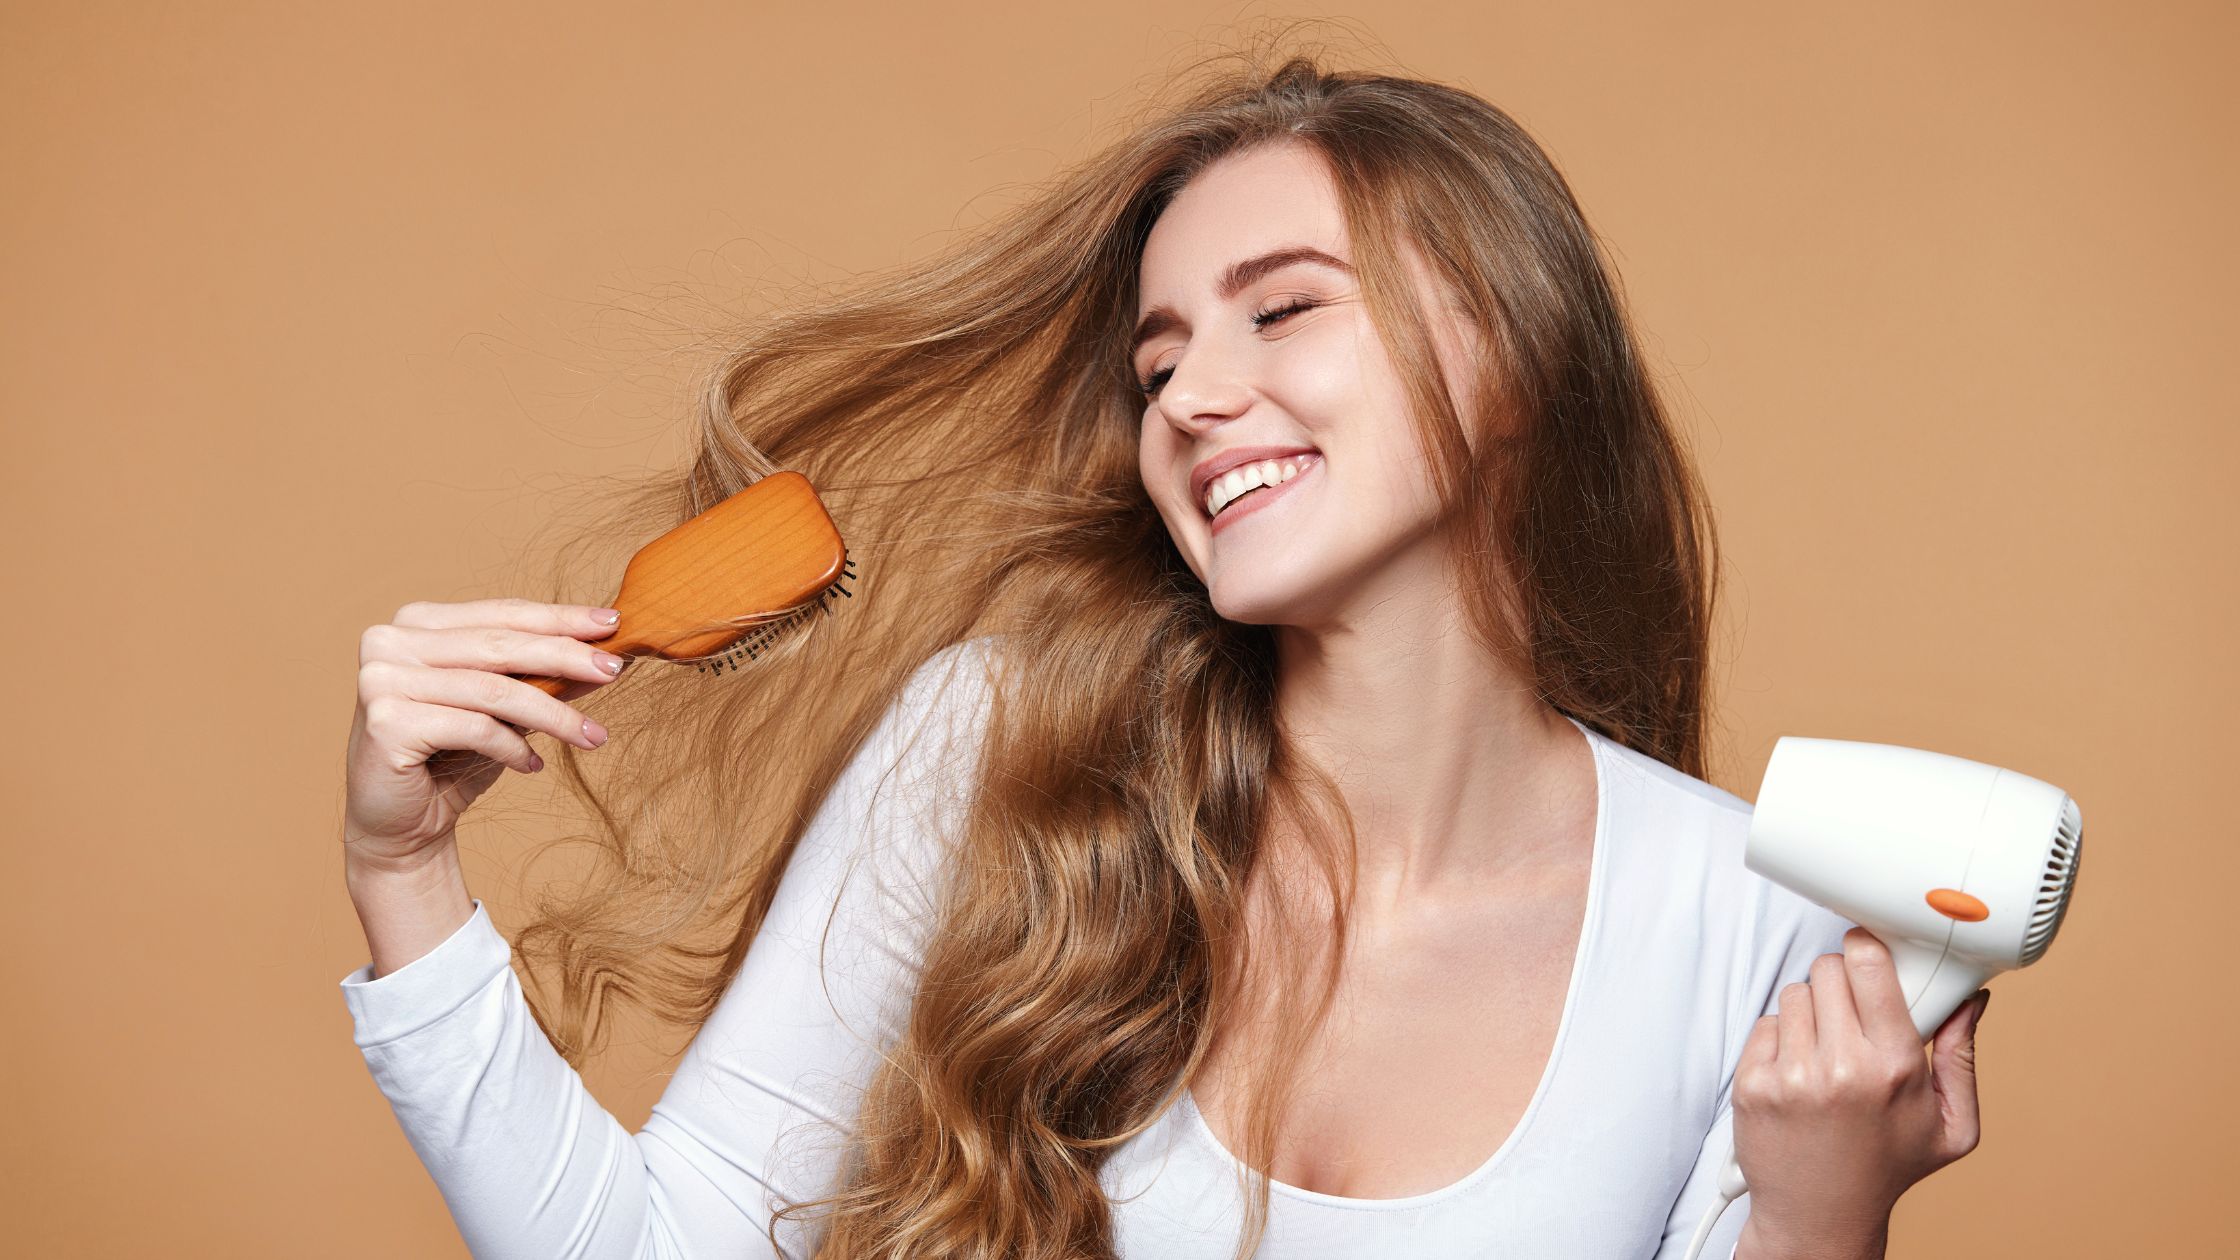 5 Common Hair Care Myths Debunked